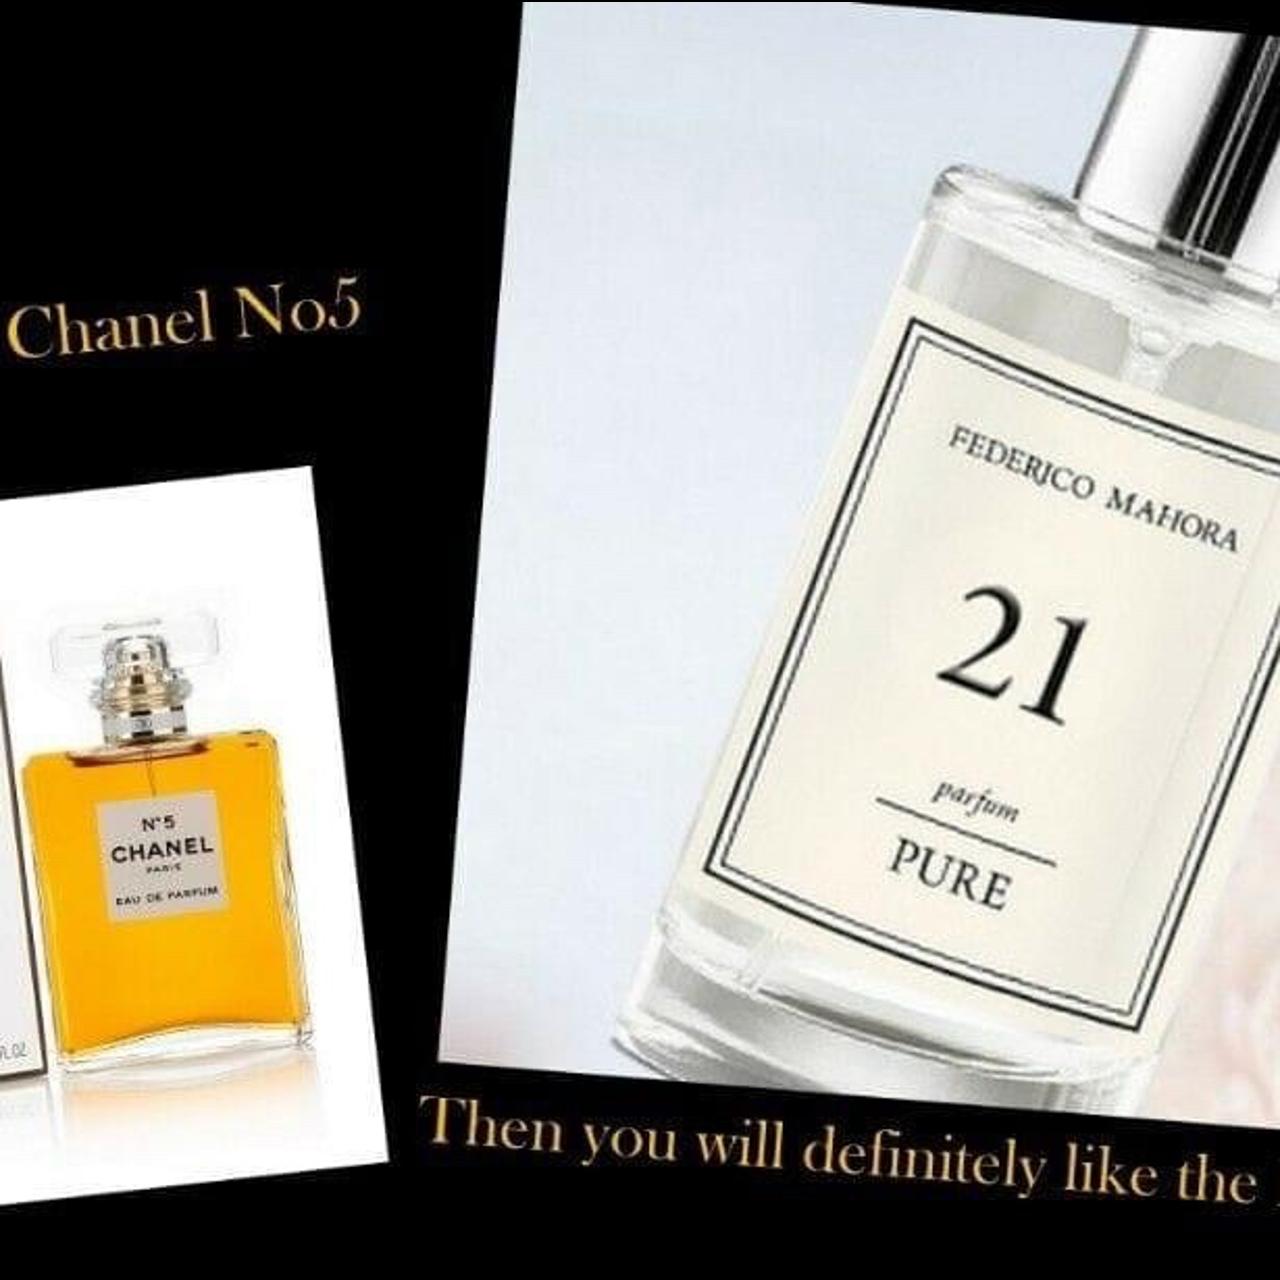 FM - 21 inspired by #Chanel No5 50ml, FM get their